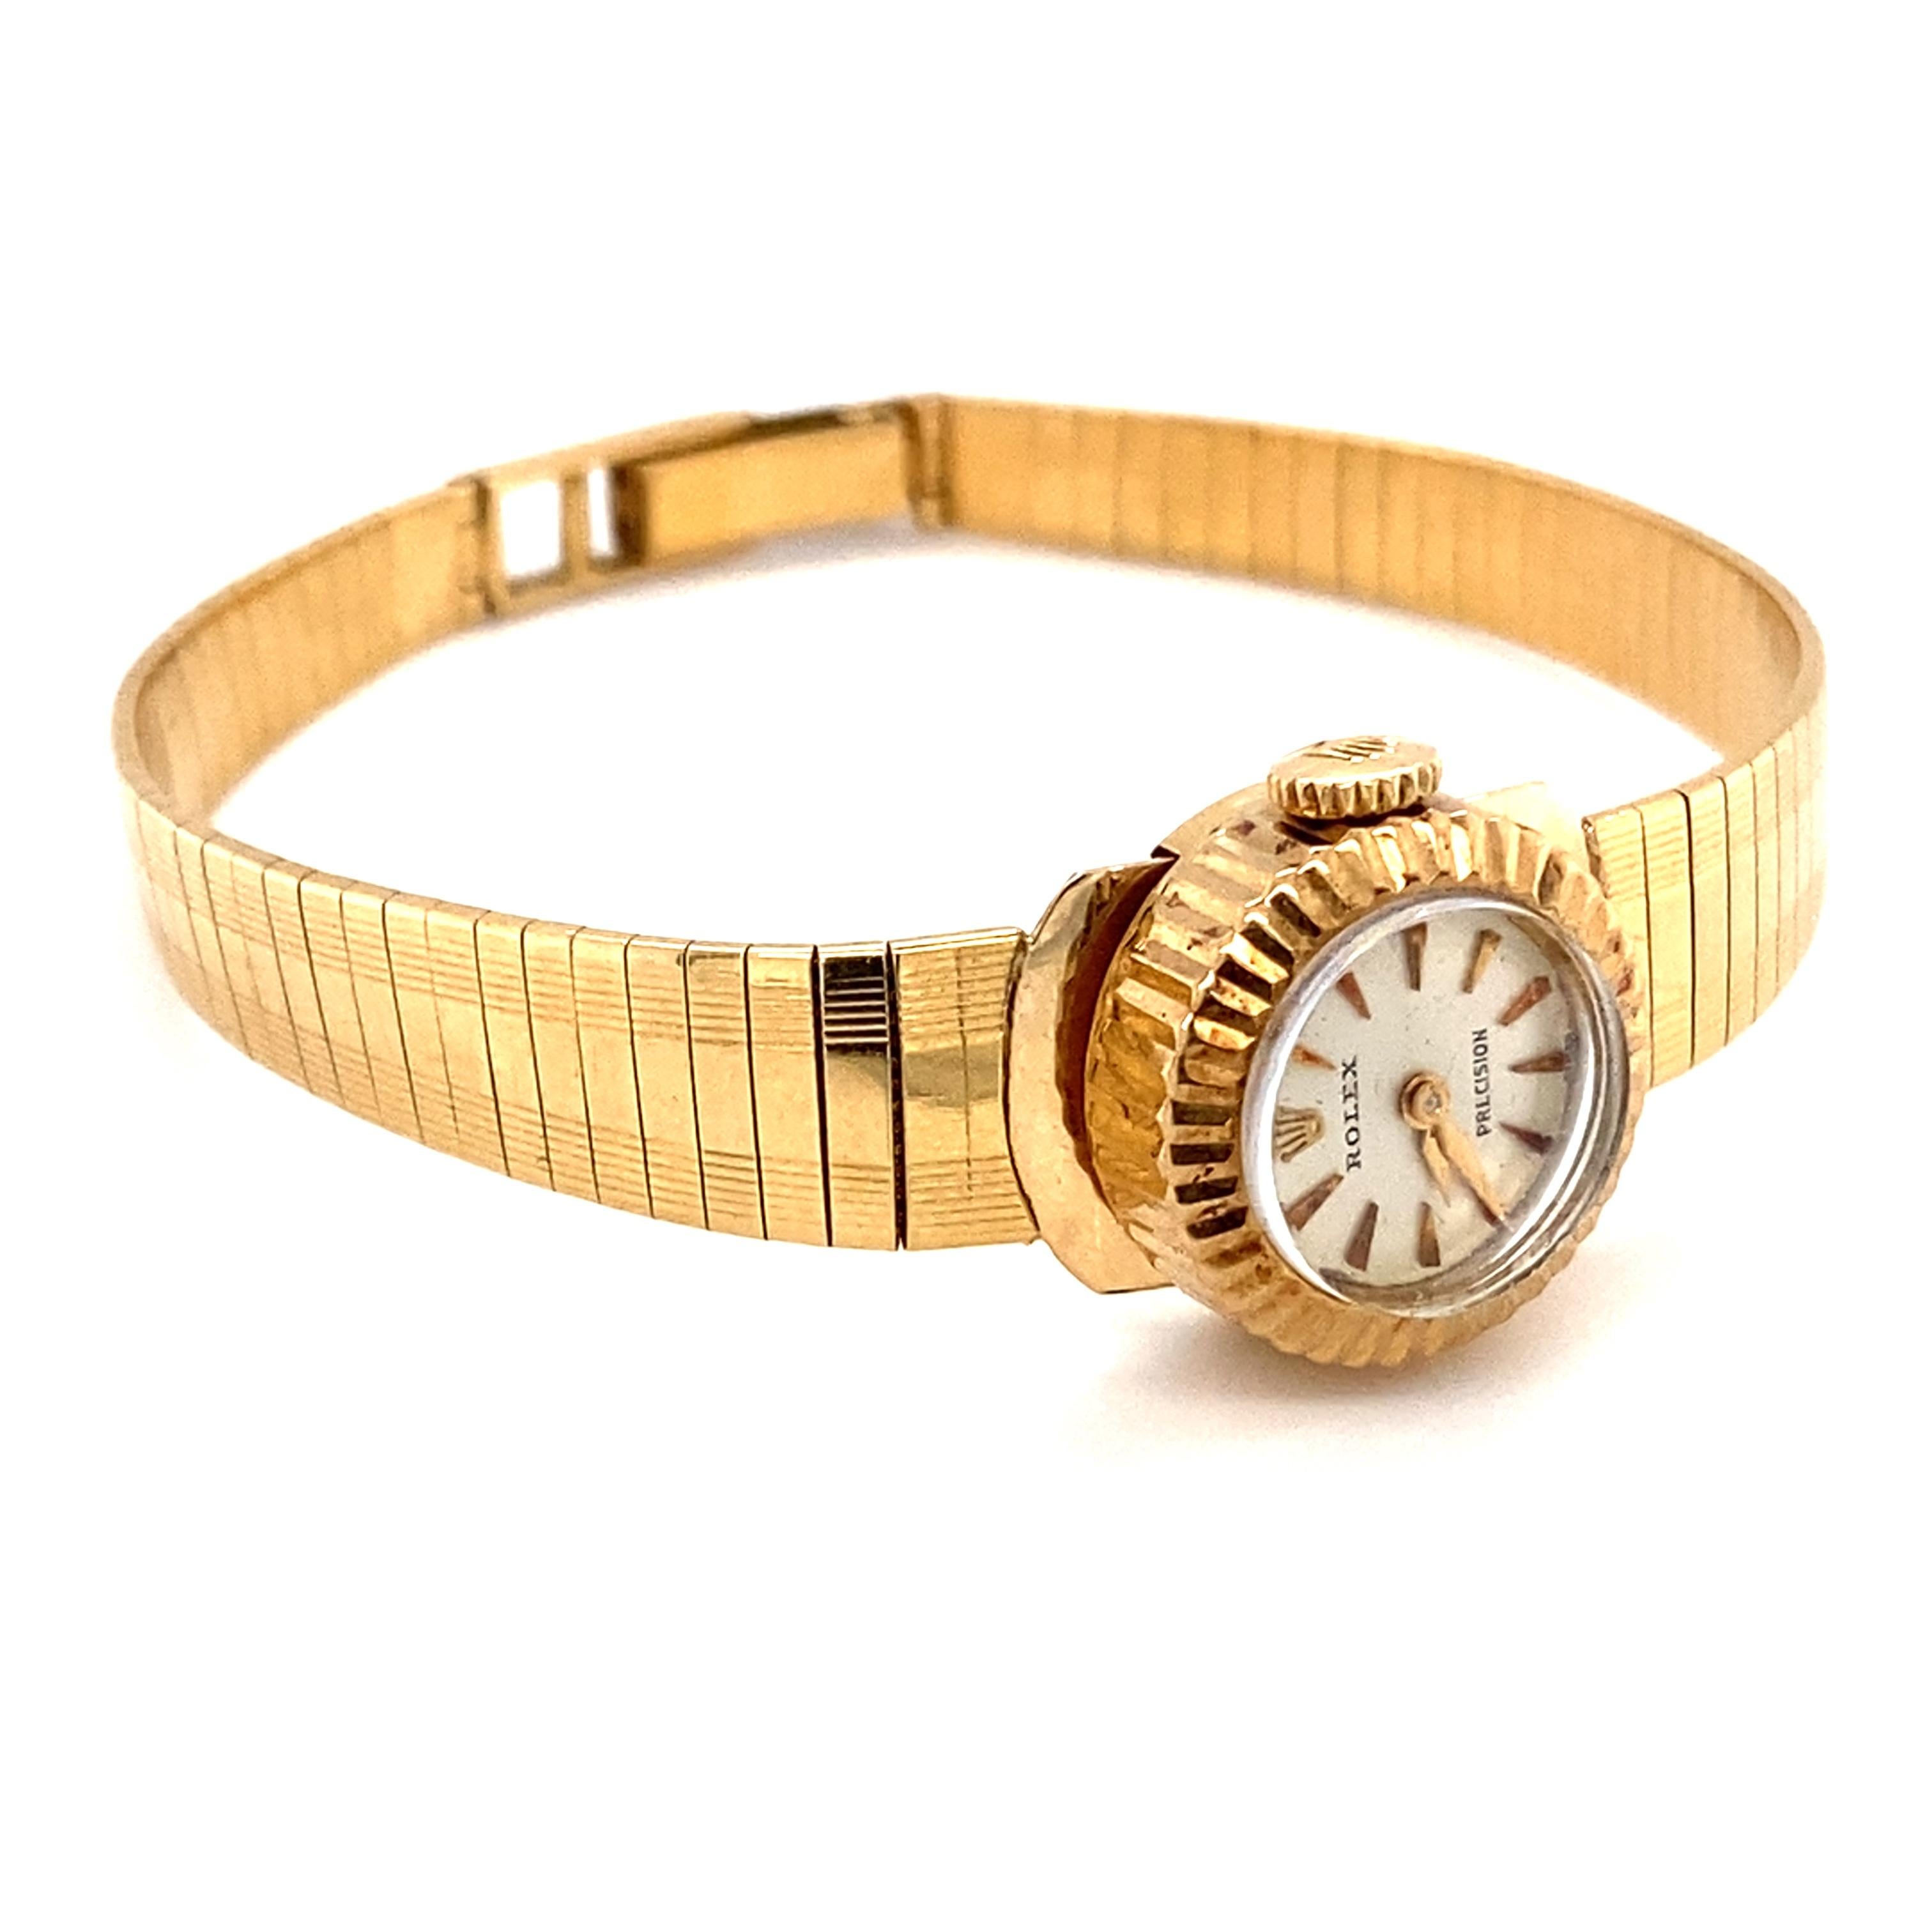 Item Details:
Metal type: 18 Karat Yellow Gold
Weight: 25.5 grams
Measures: 7 inch length 

Item Features:
Made in the 1960s
Decorative and aesthetically pleasing Retro 18 karat yellow gold textured band, fits 7 inch length. The band has a security